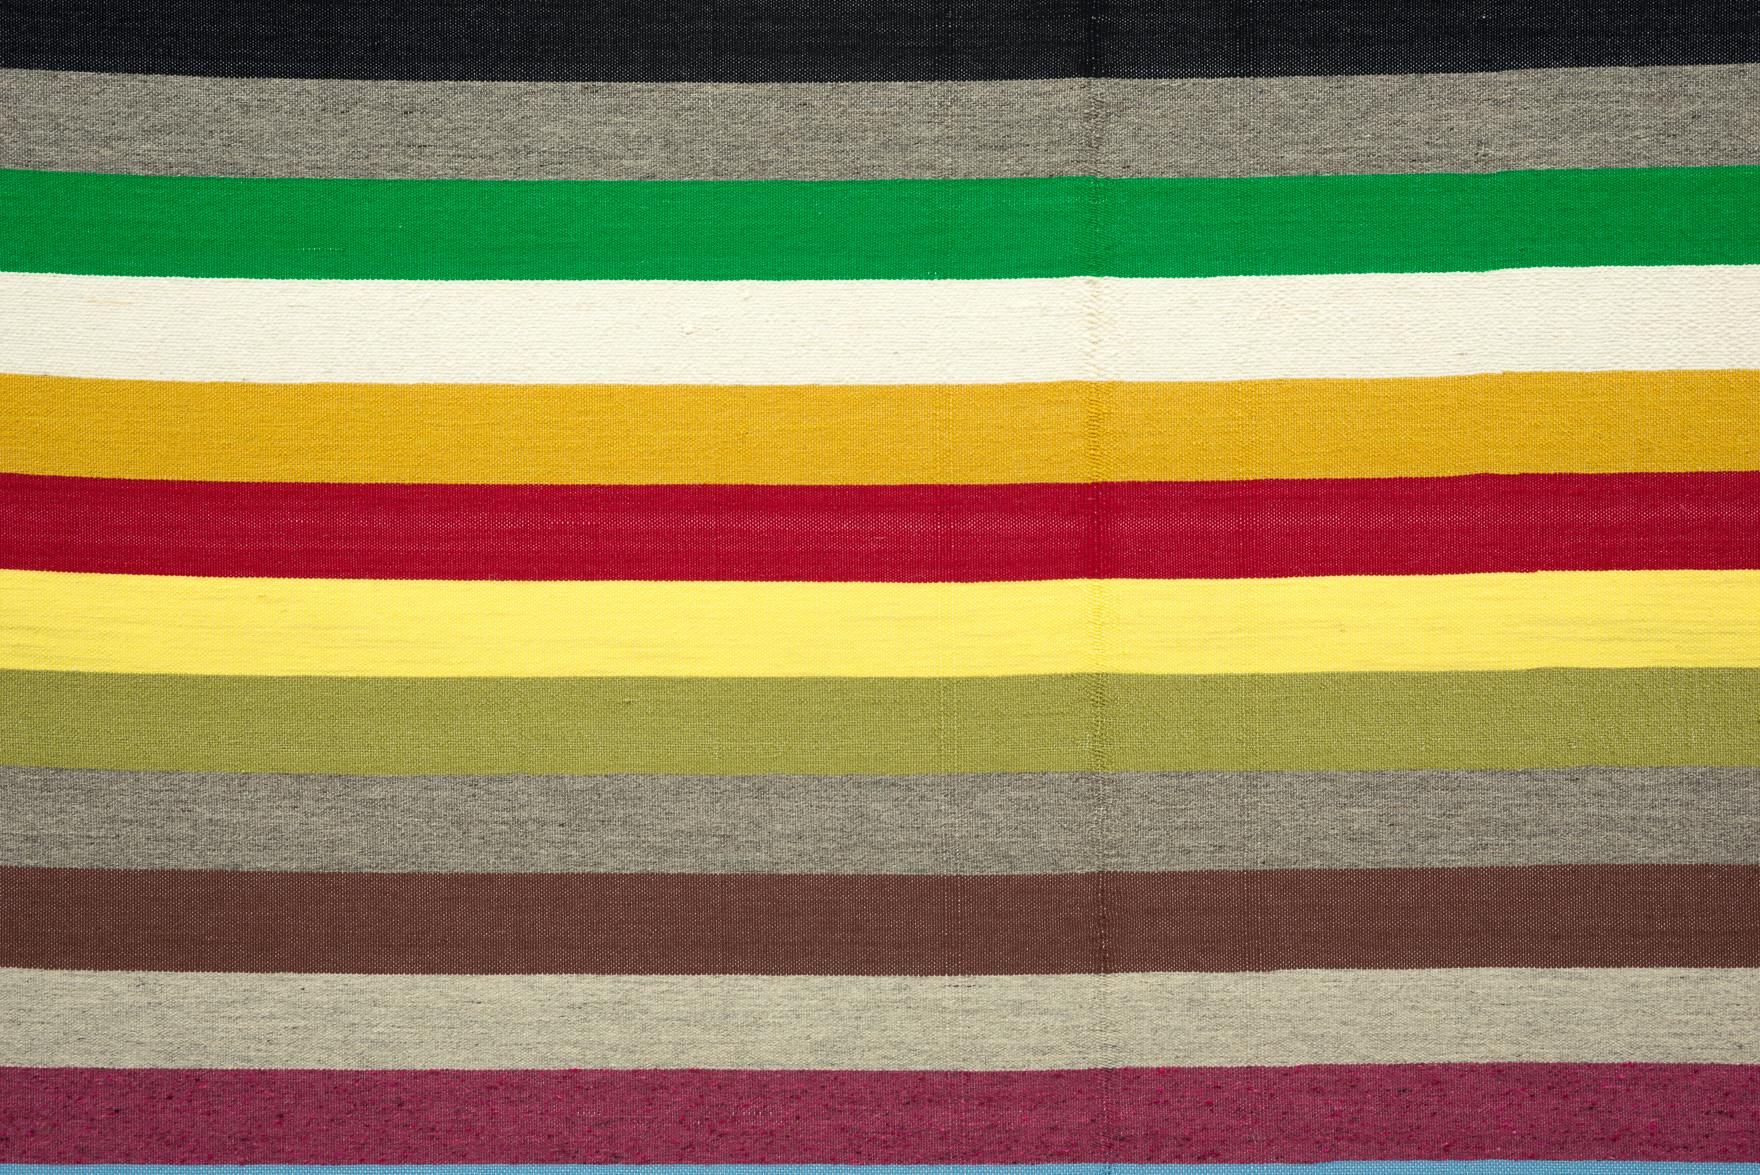 A close up view of a weaving. The weaving is made up of horizontal stripes in various colours including, browns, greens, yellows, greys, white, red and purple.